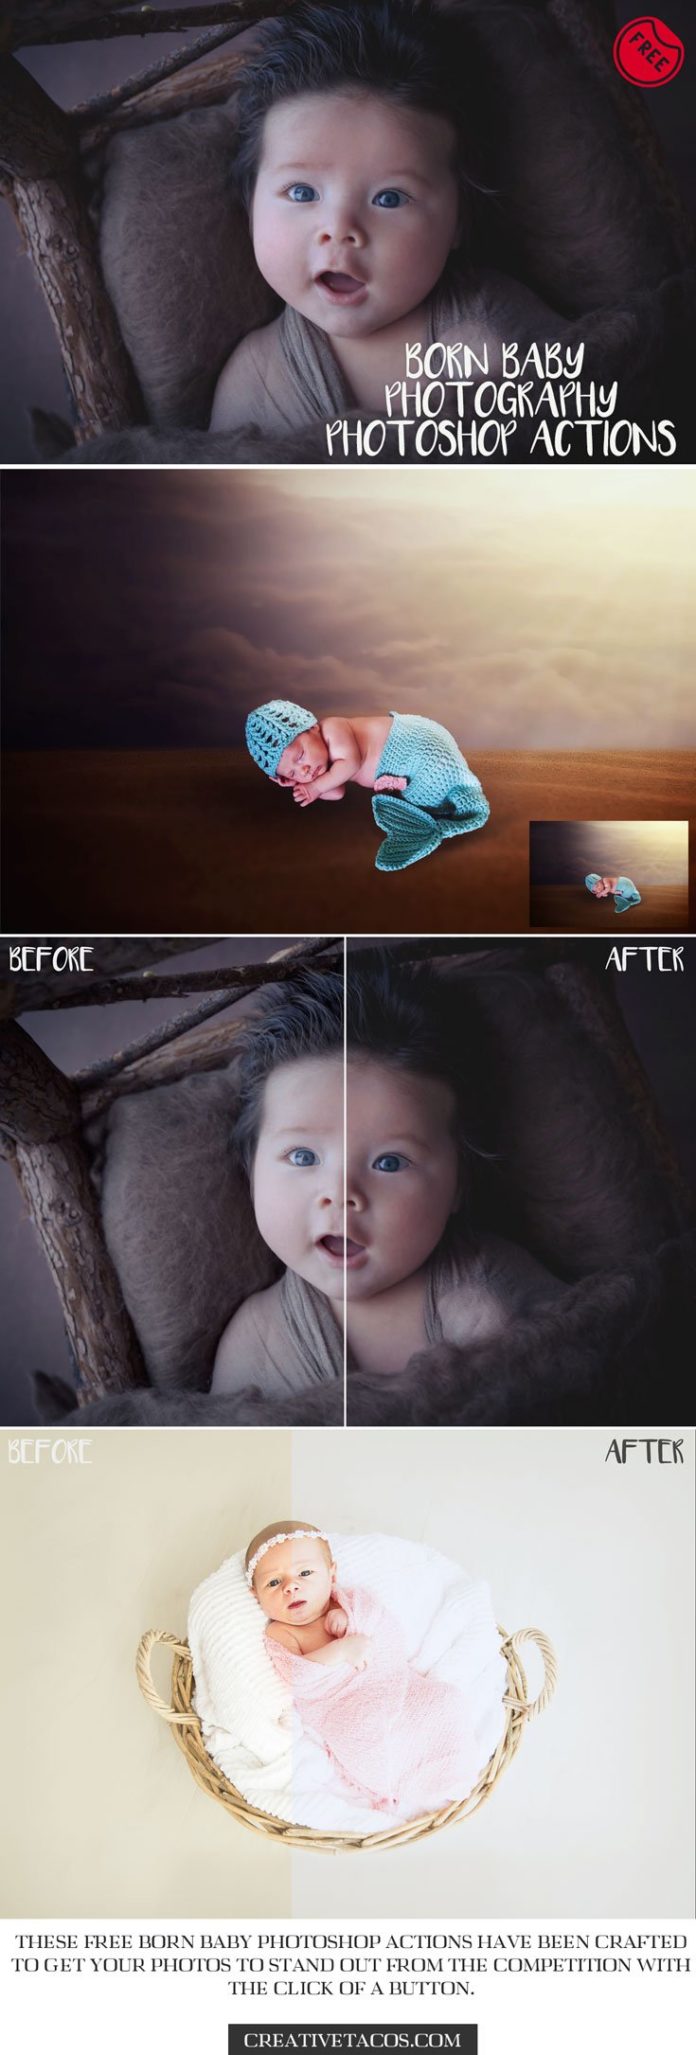 baby photoshop actions free download